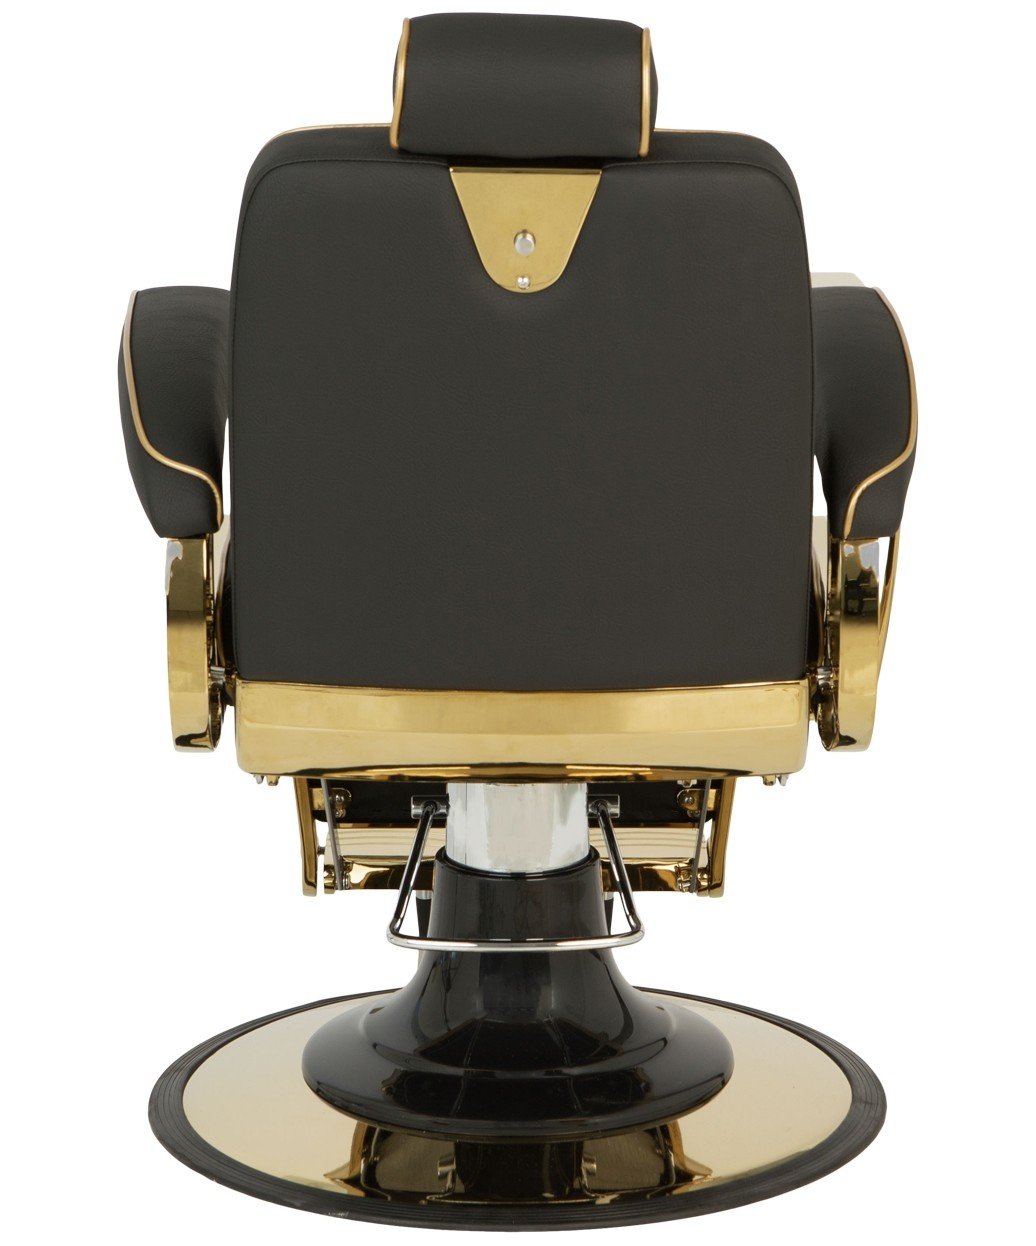 Zeus Gold Professional Barber Chair